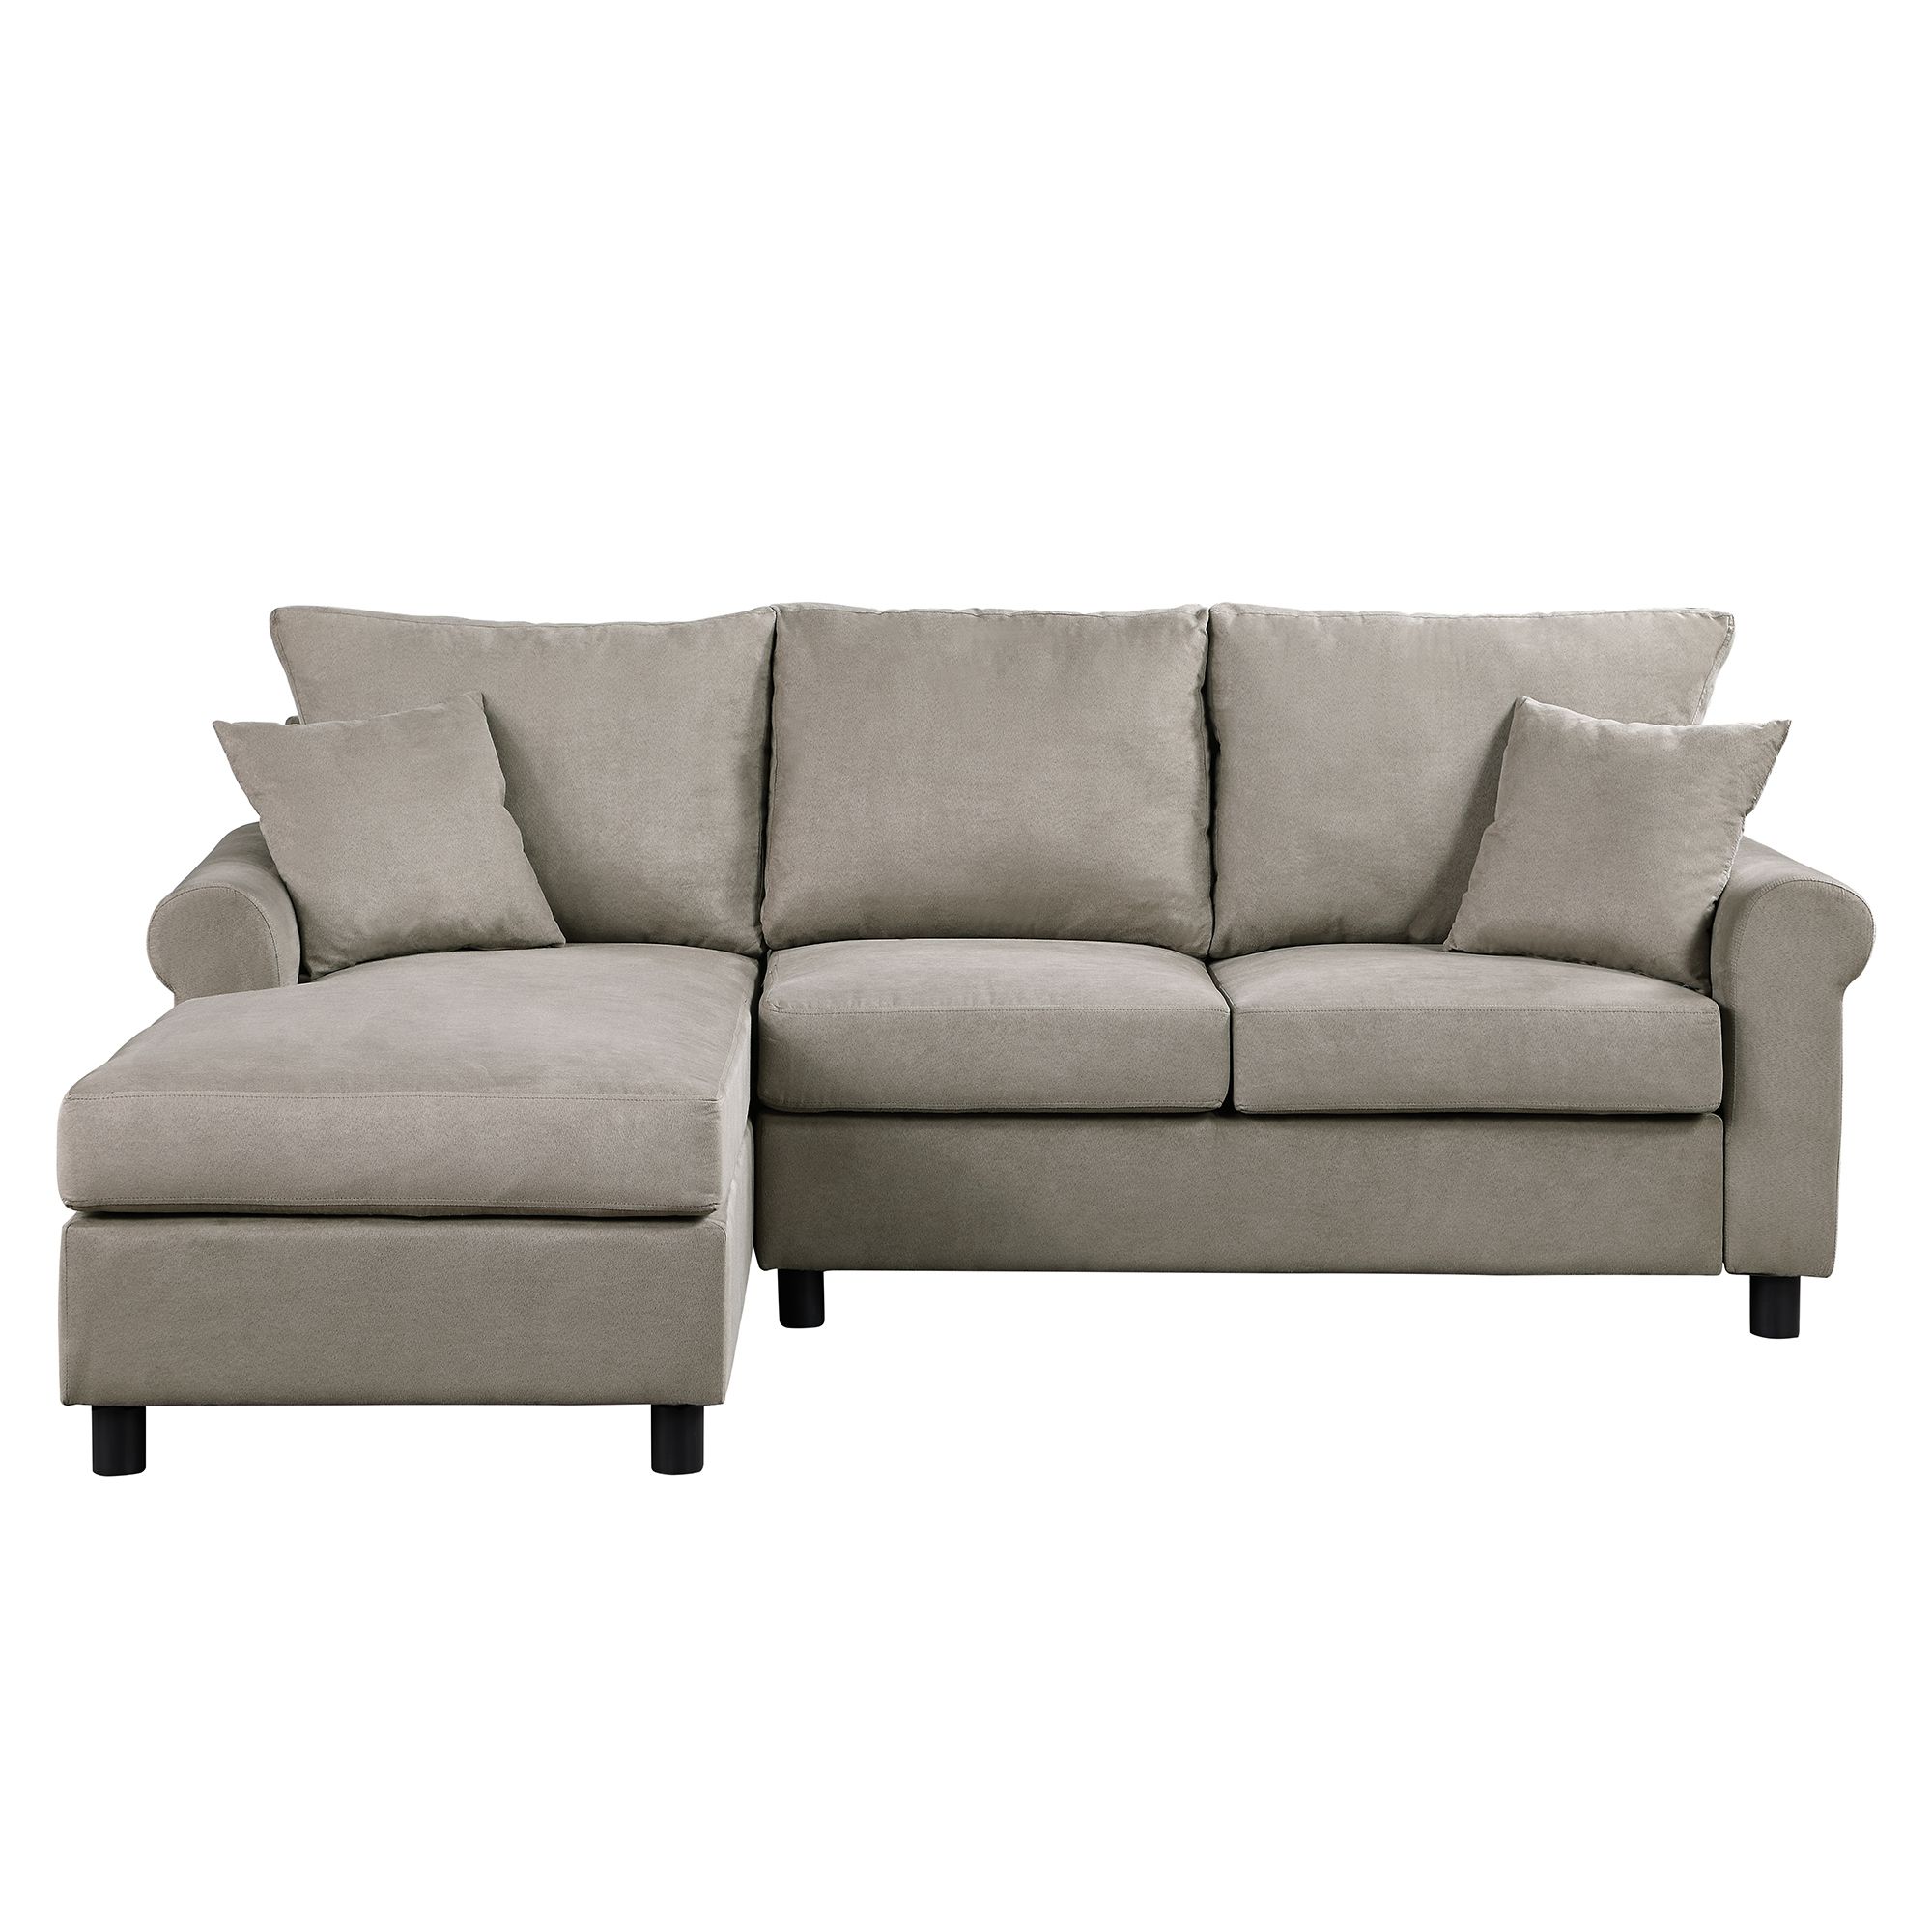 Sectional Sofa, Segmart 35'' X 85'' X 61'' Tufted For Clifton Reversible Sectional Sofas With Pillows (View 3 of 15)